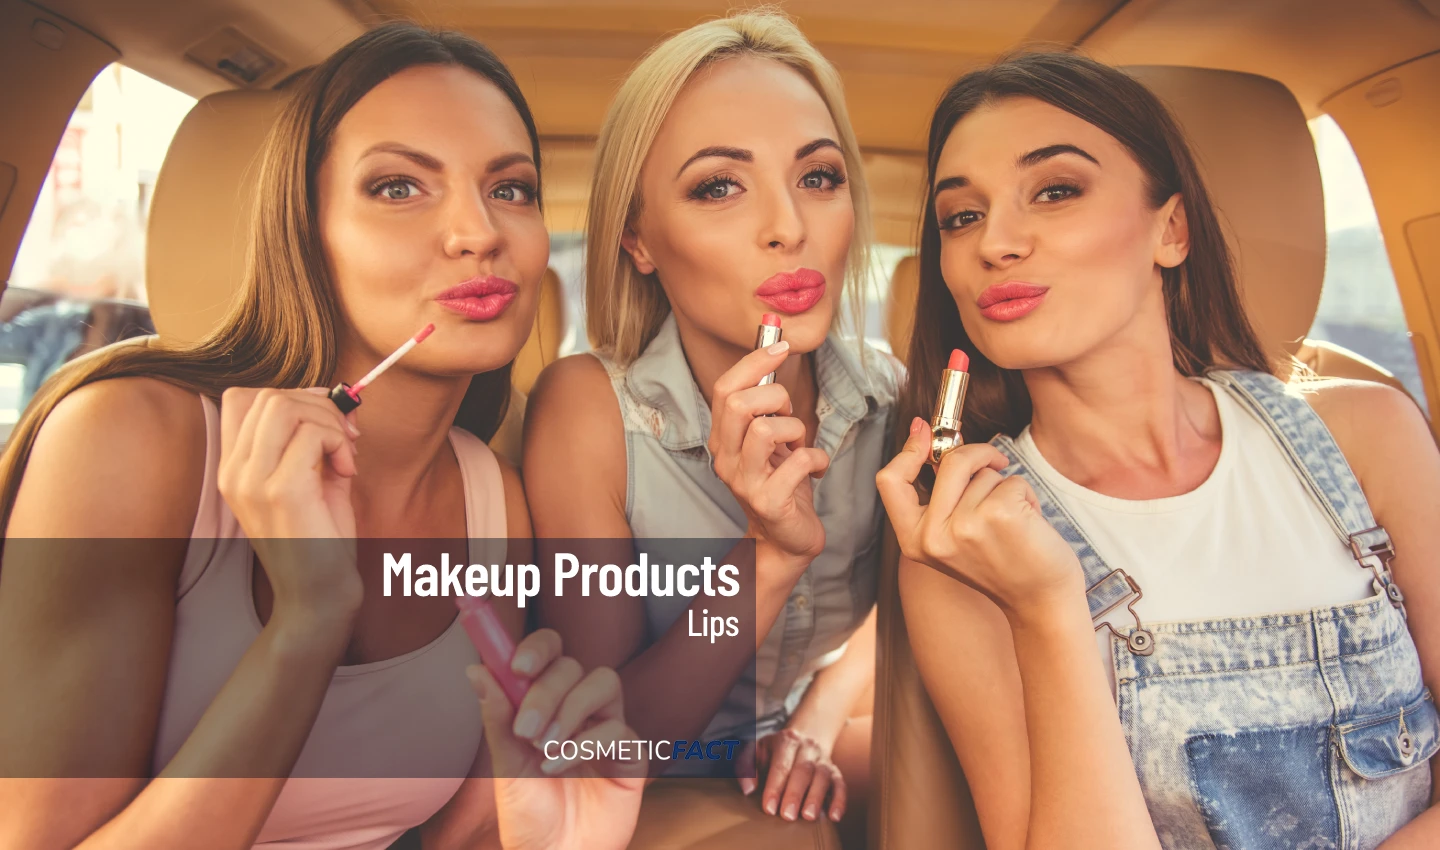 Group of women applying travel-friendly lip makeup on-the-go, including lipsticks and lip balms.